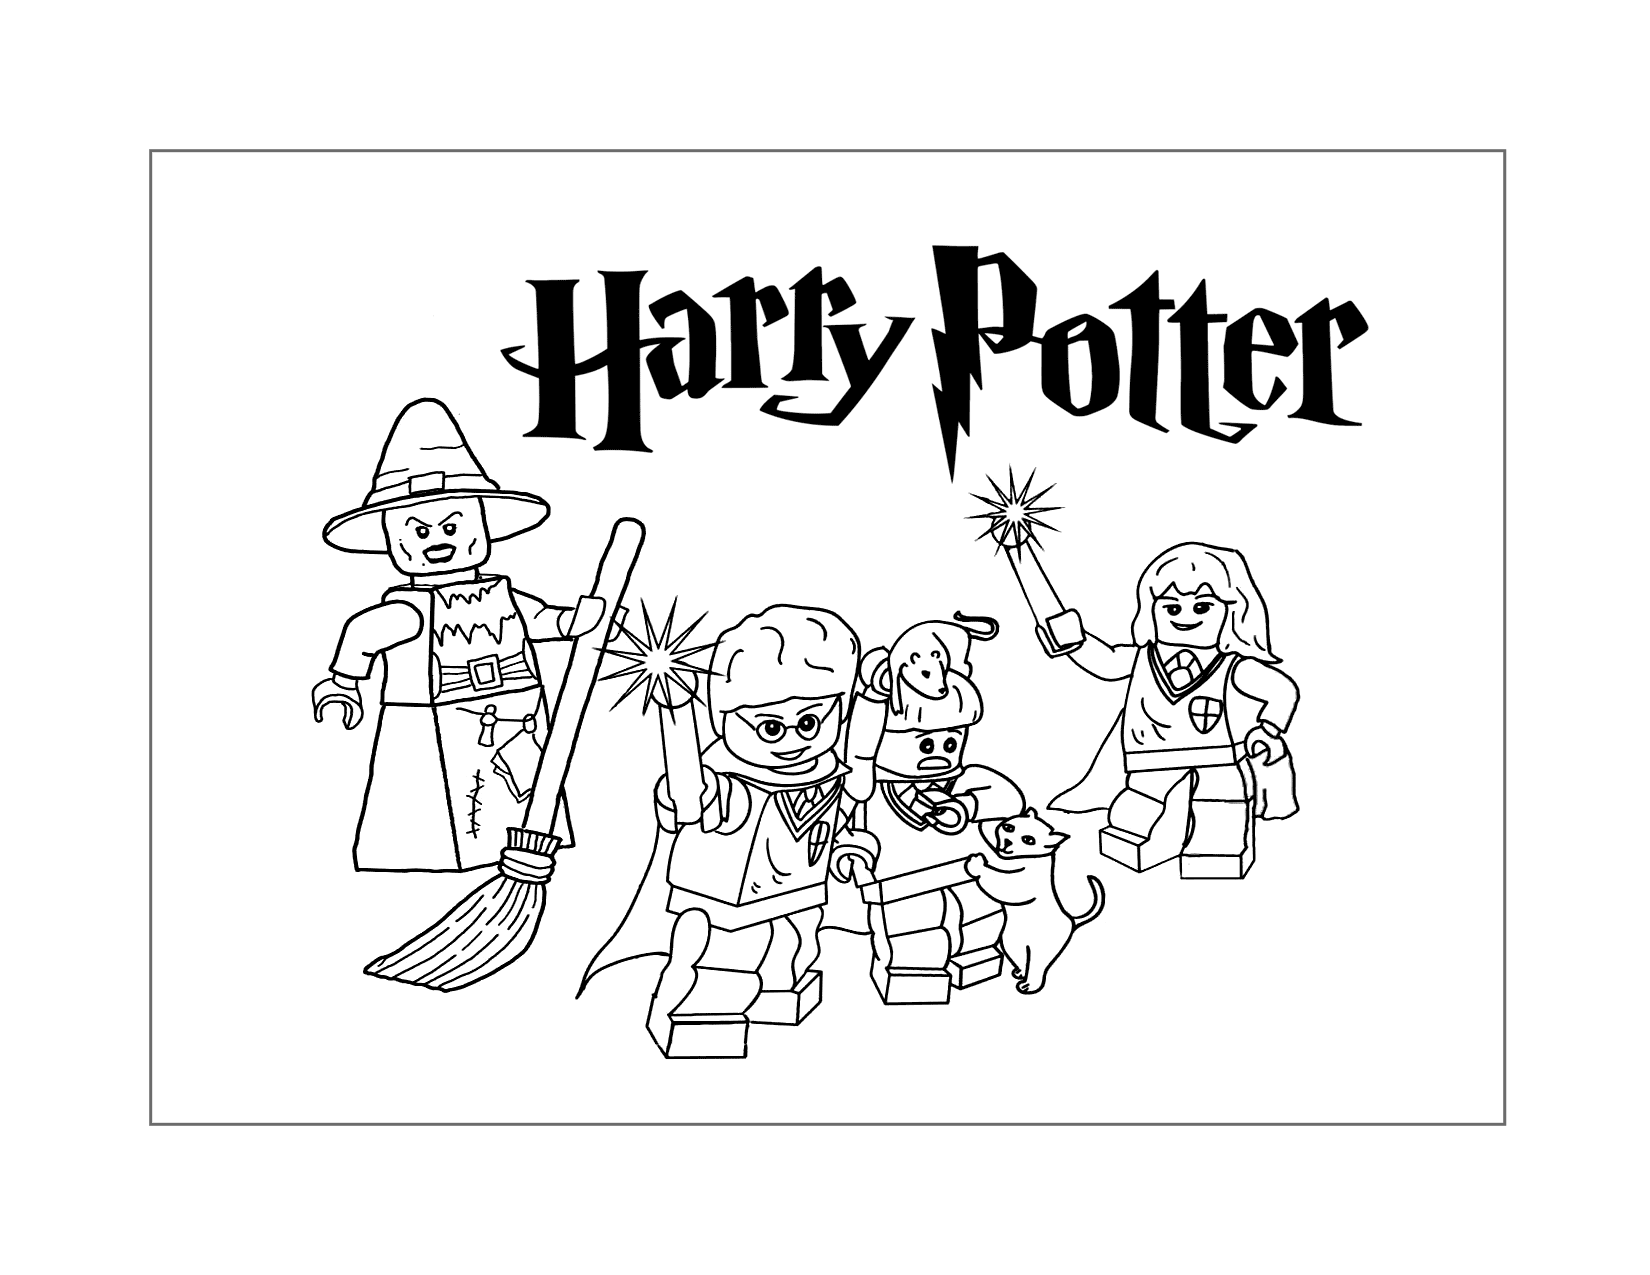 Harry Potter Lego Coloring Page